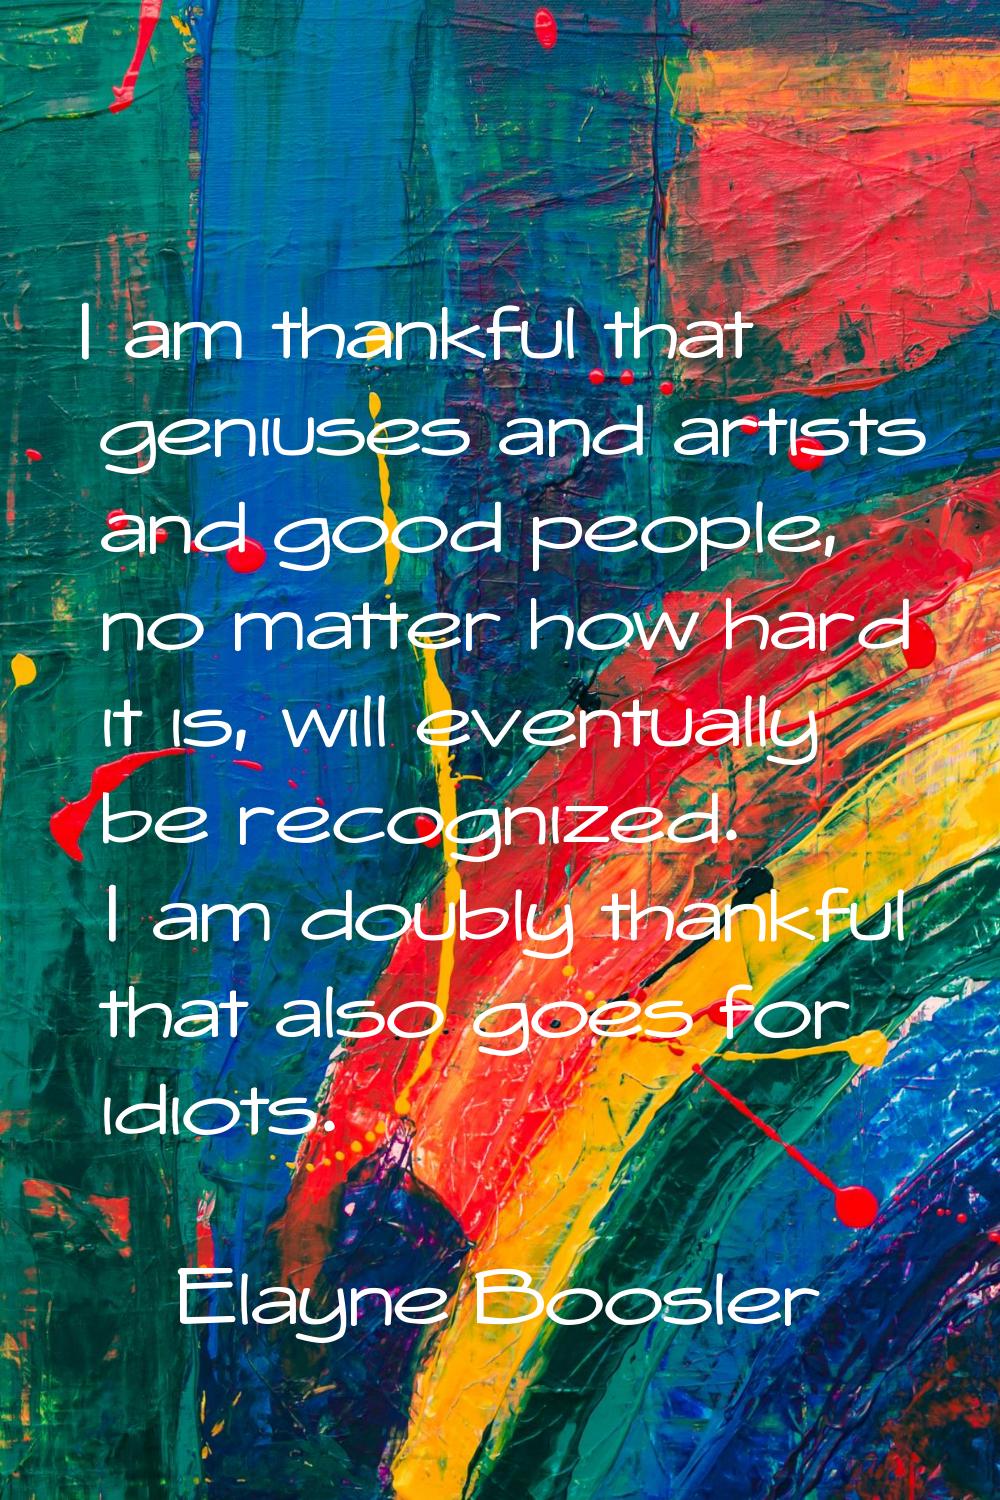 I am thankful that geniuses and artists and good people, no matter how hard it is, will eventually 